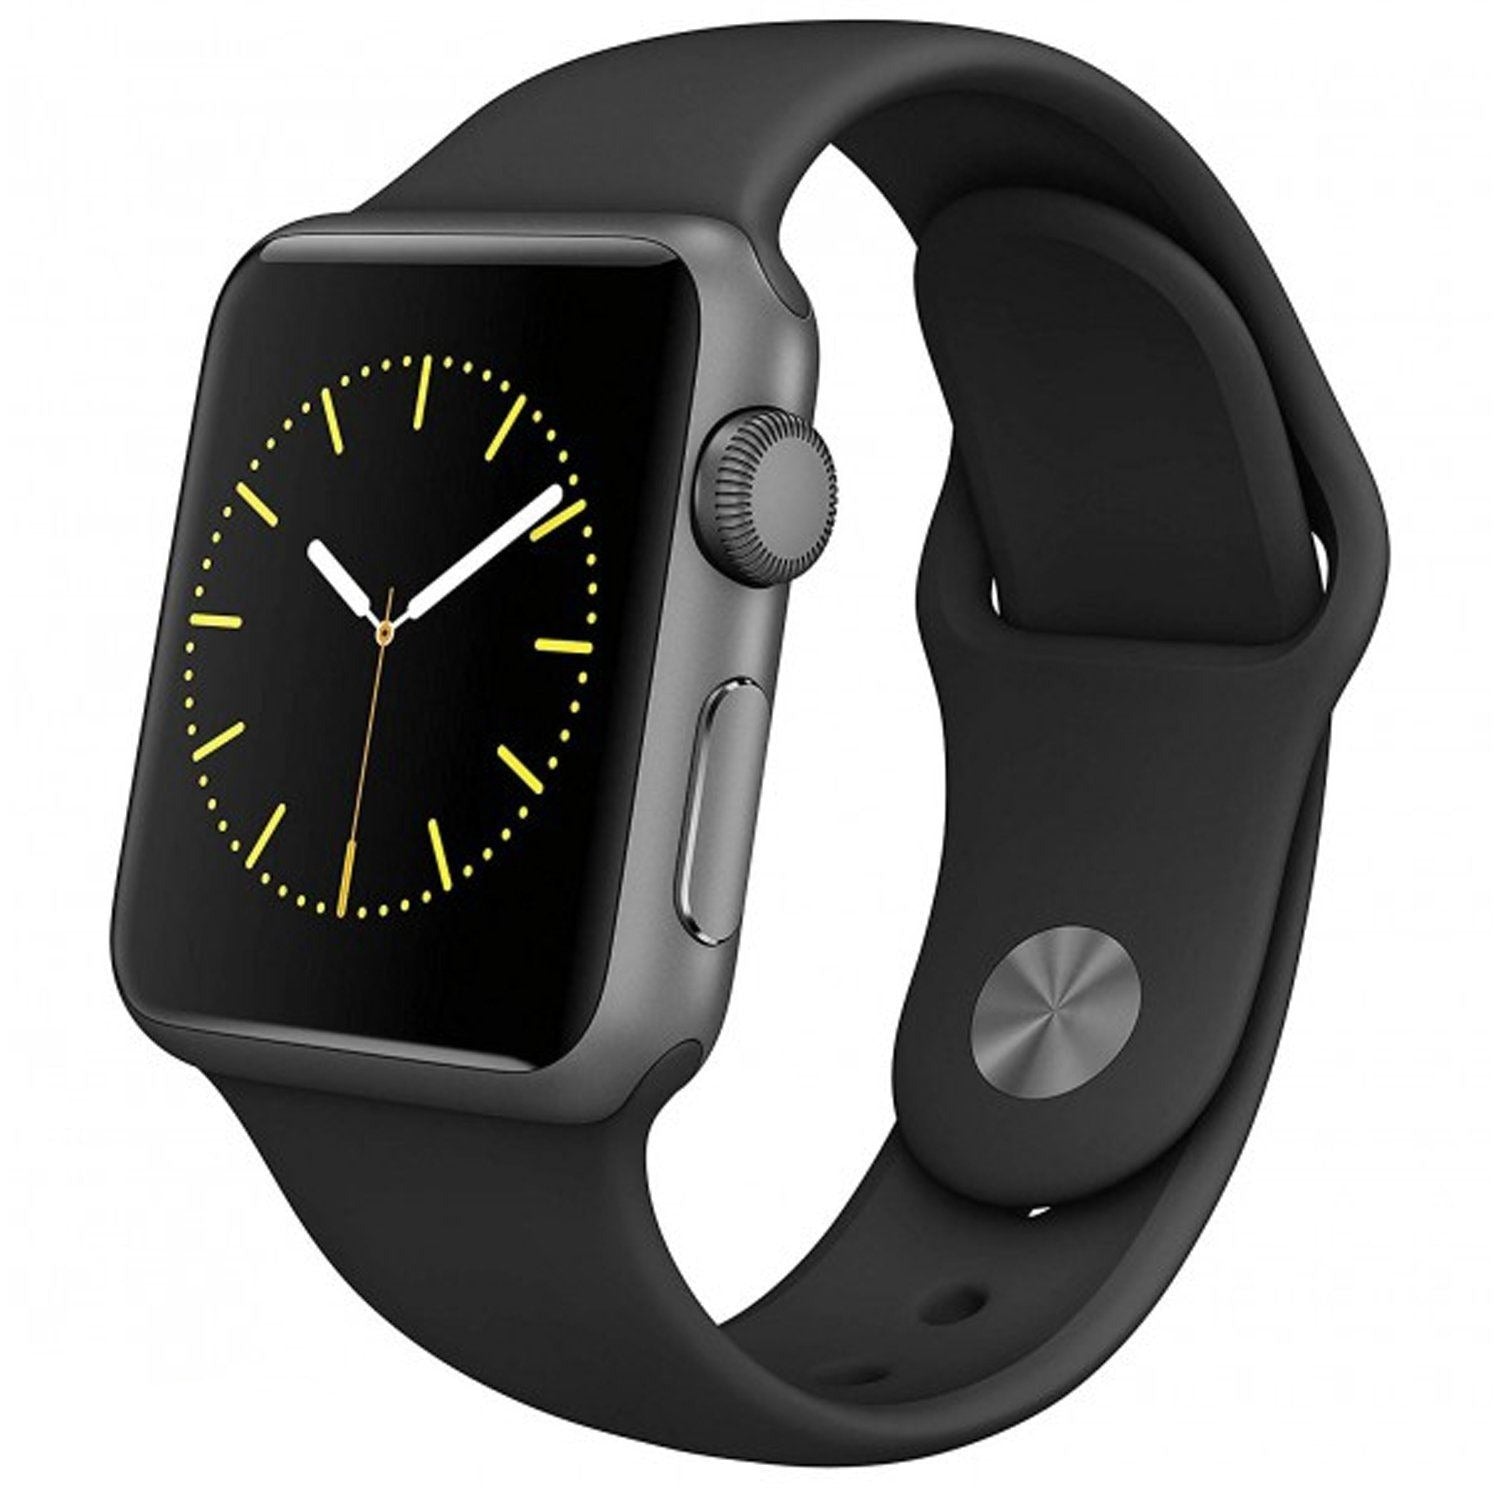 Apple Watch Smartwatch - Assorted Sizes and Colors / Silver / 42mm